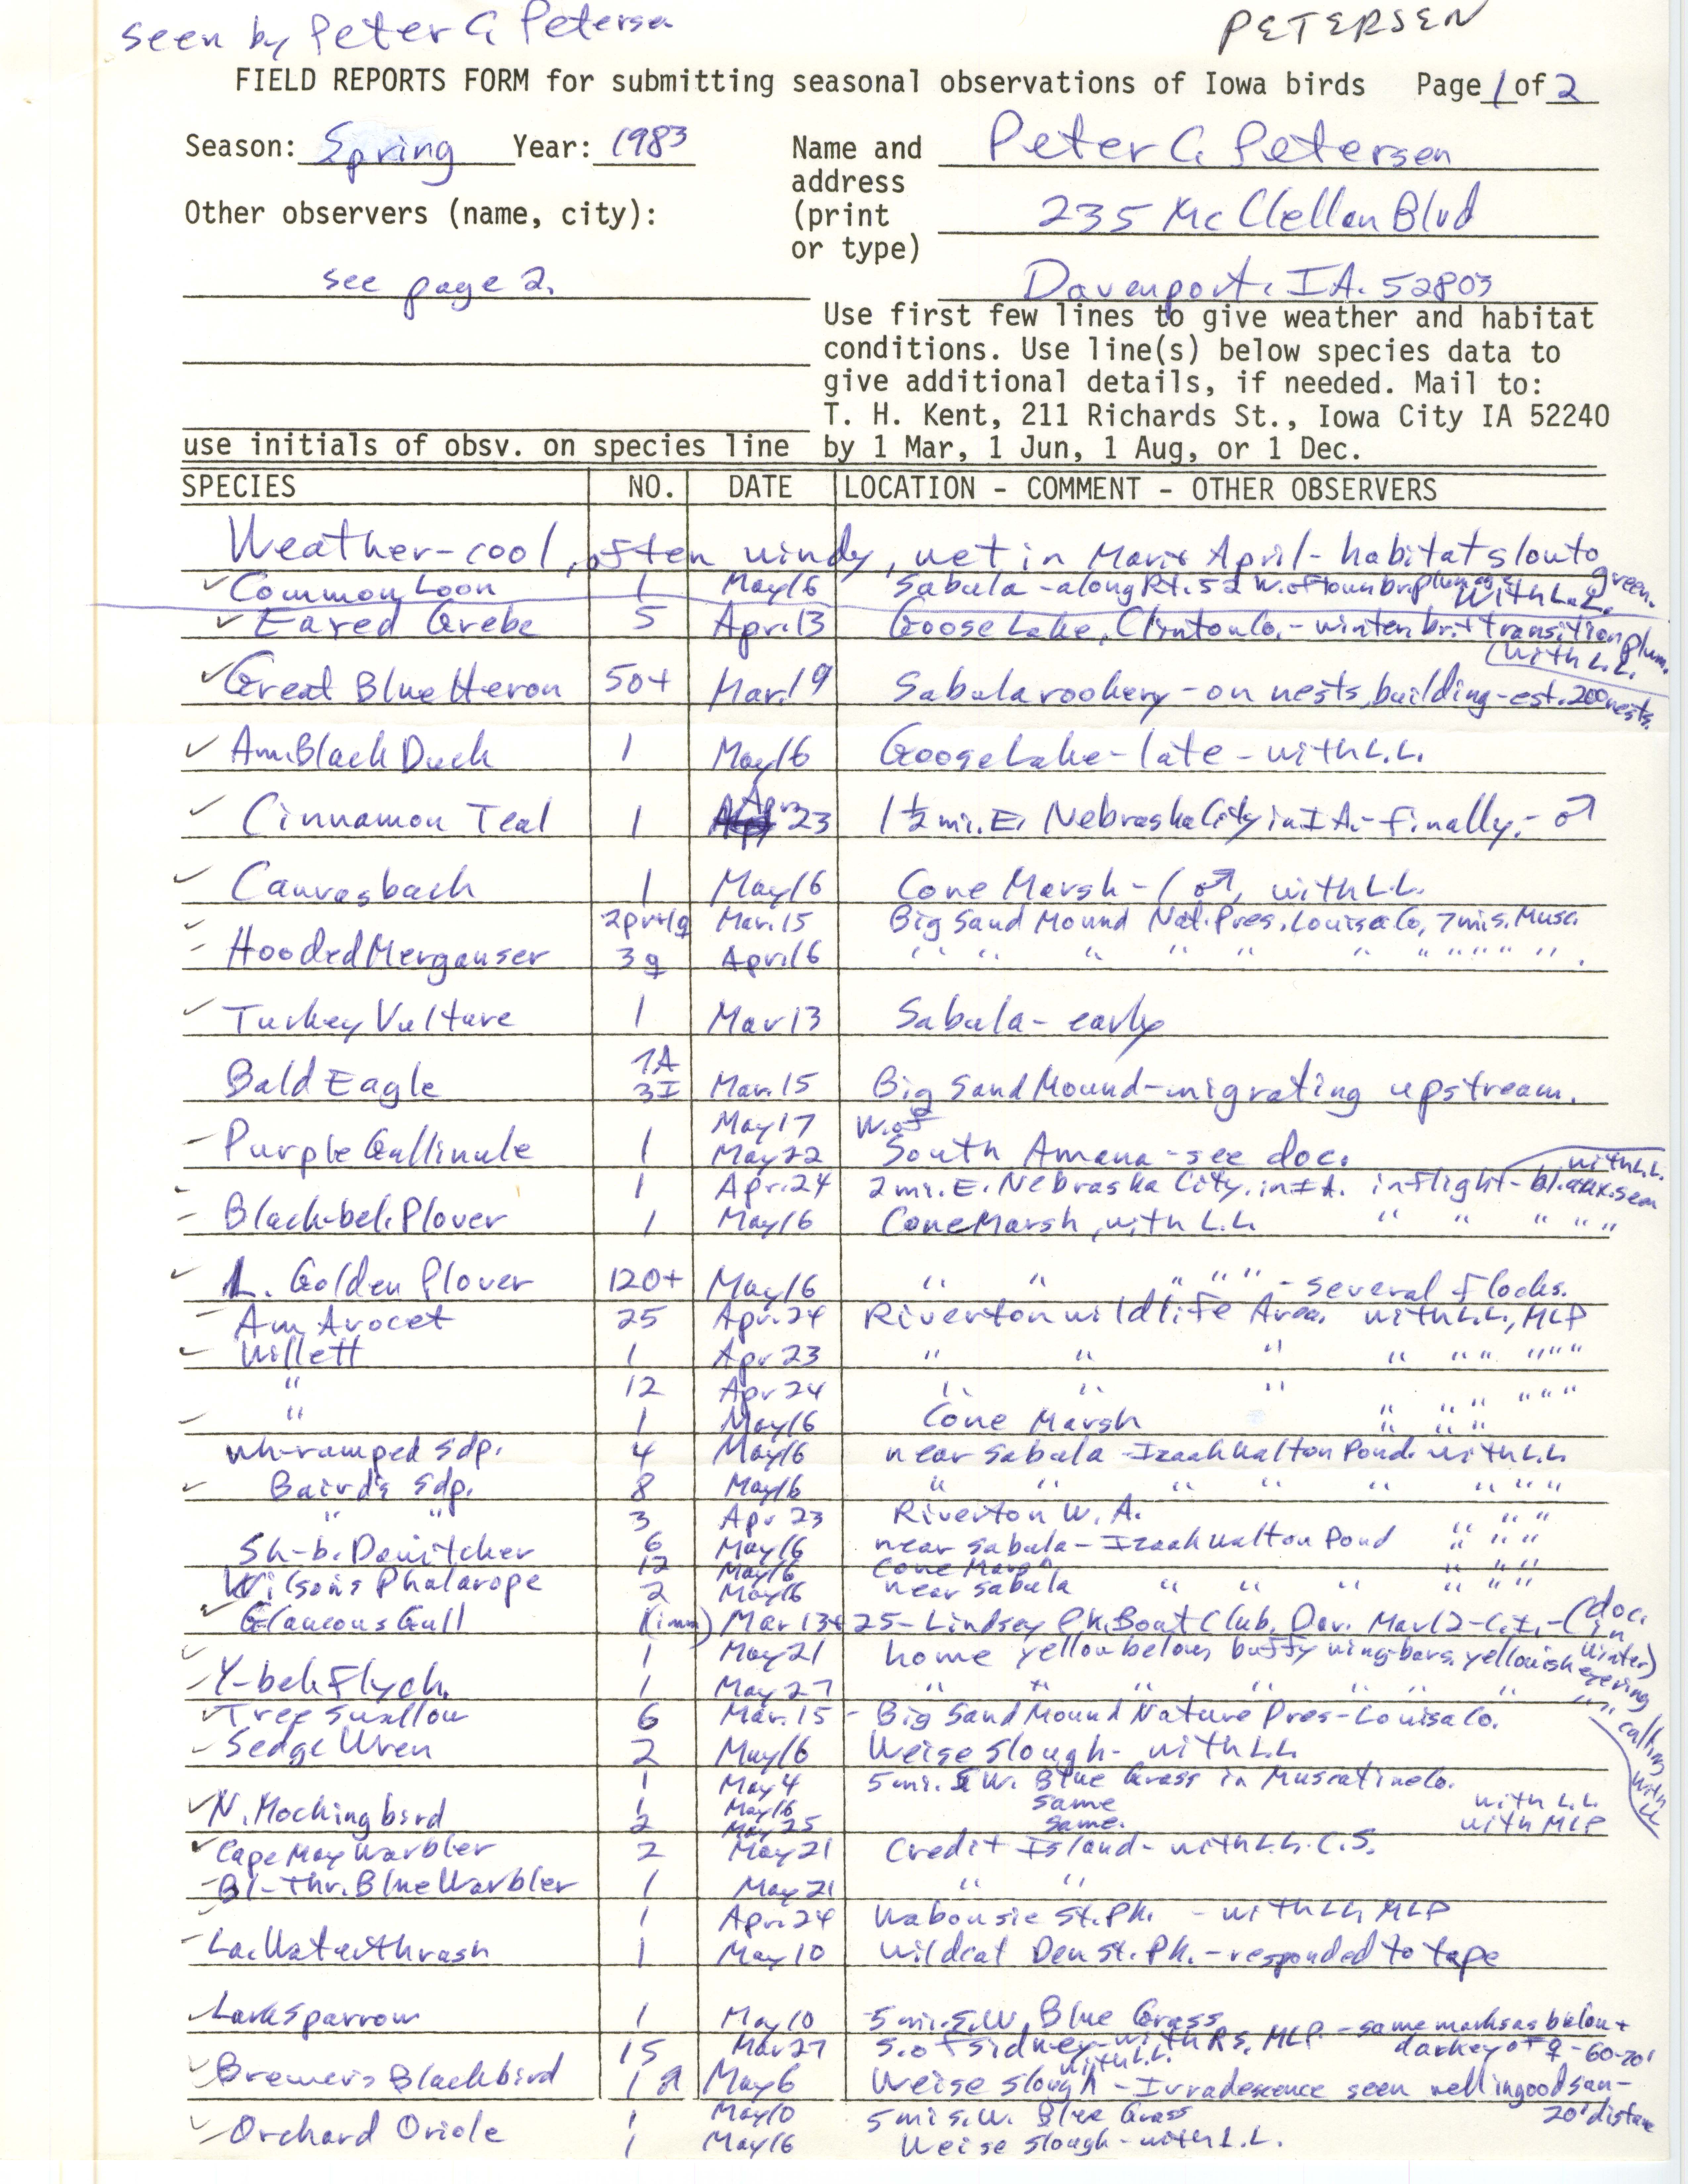 Field reports form for submitting seasonal observations of Iowa birds, Peter C. Petersen, spring 1983